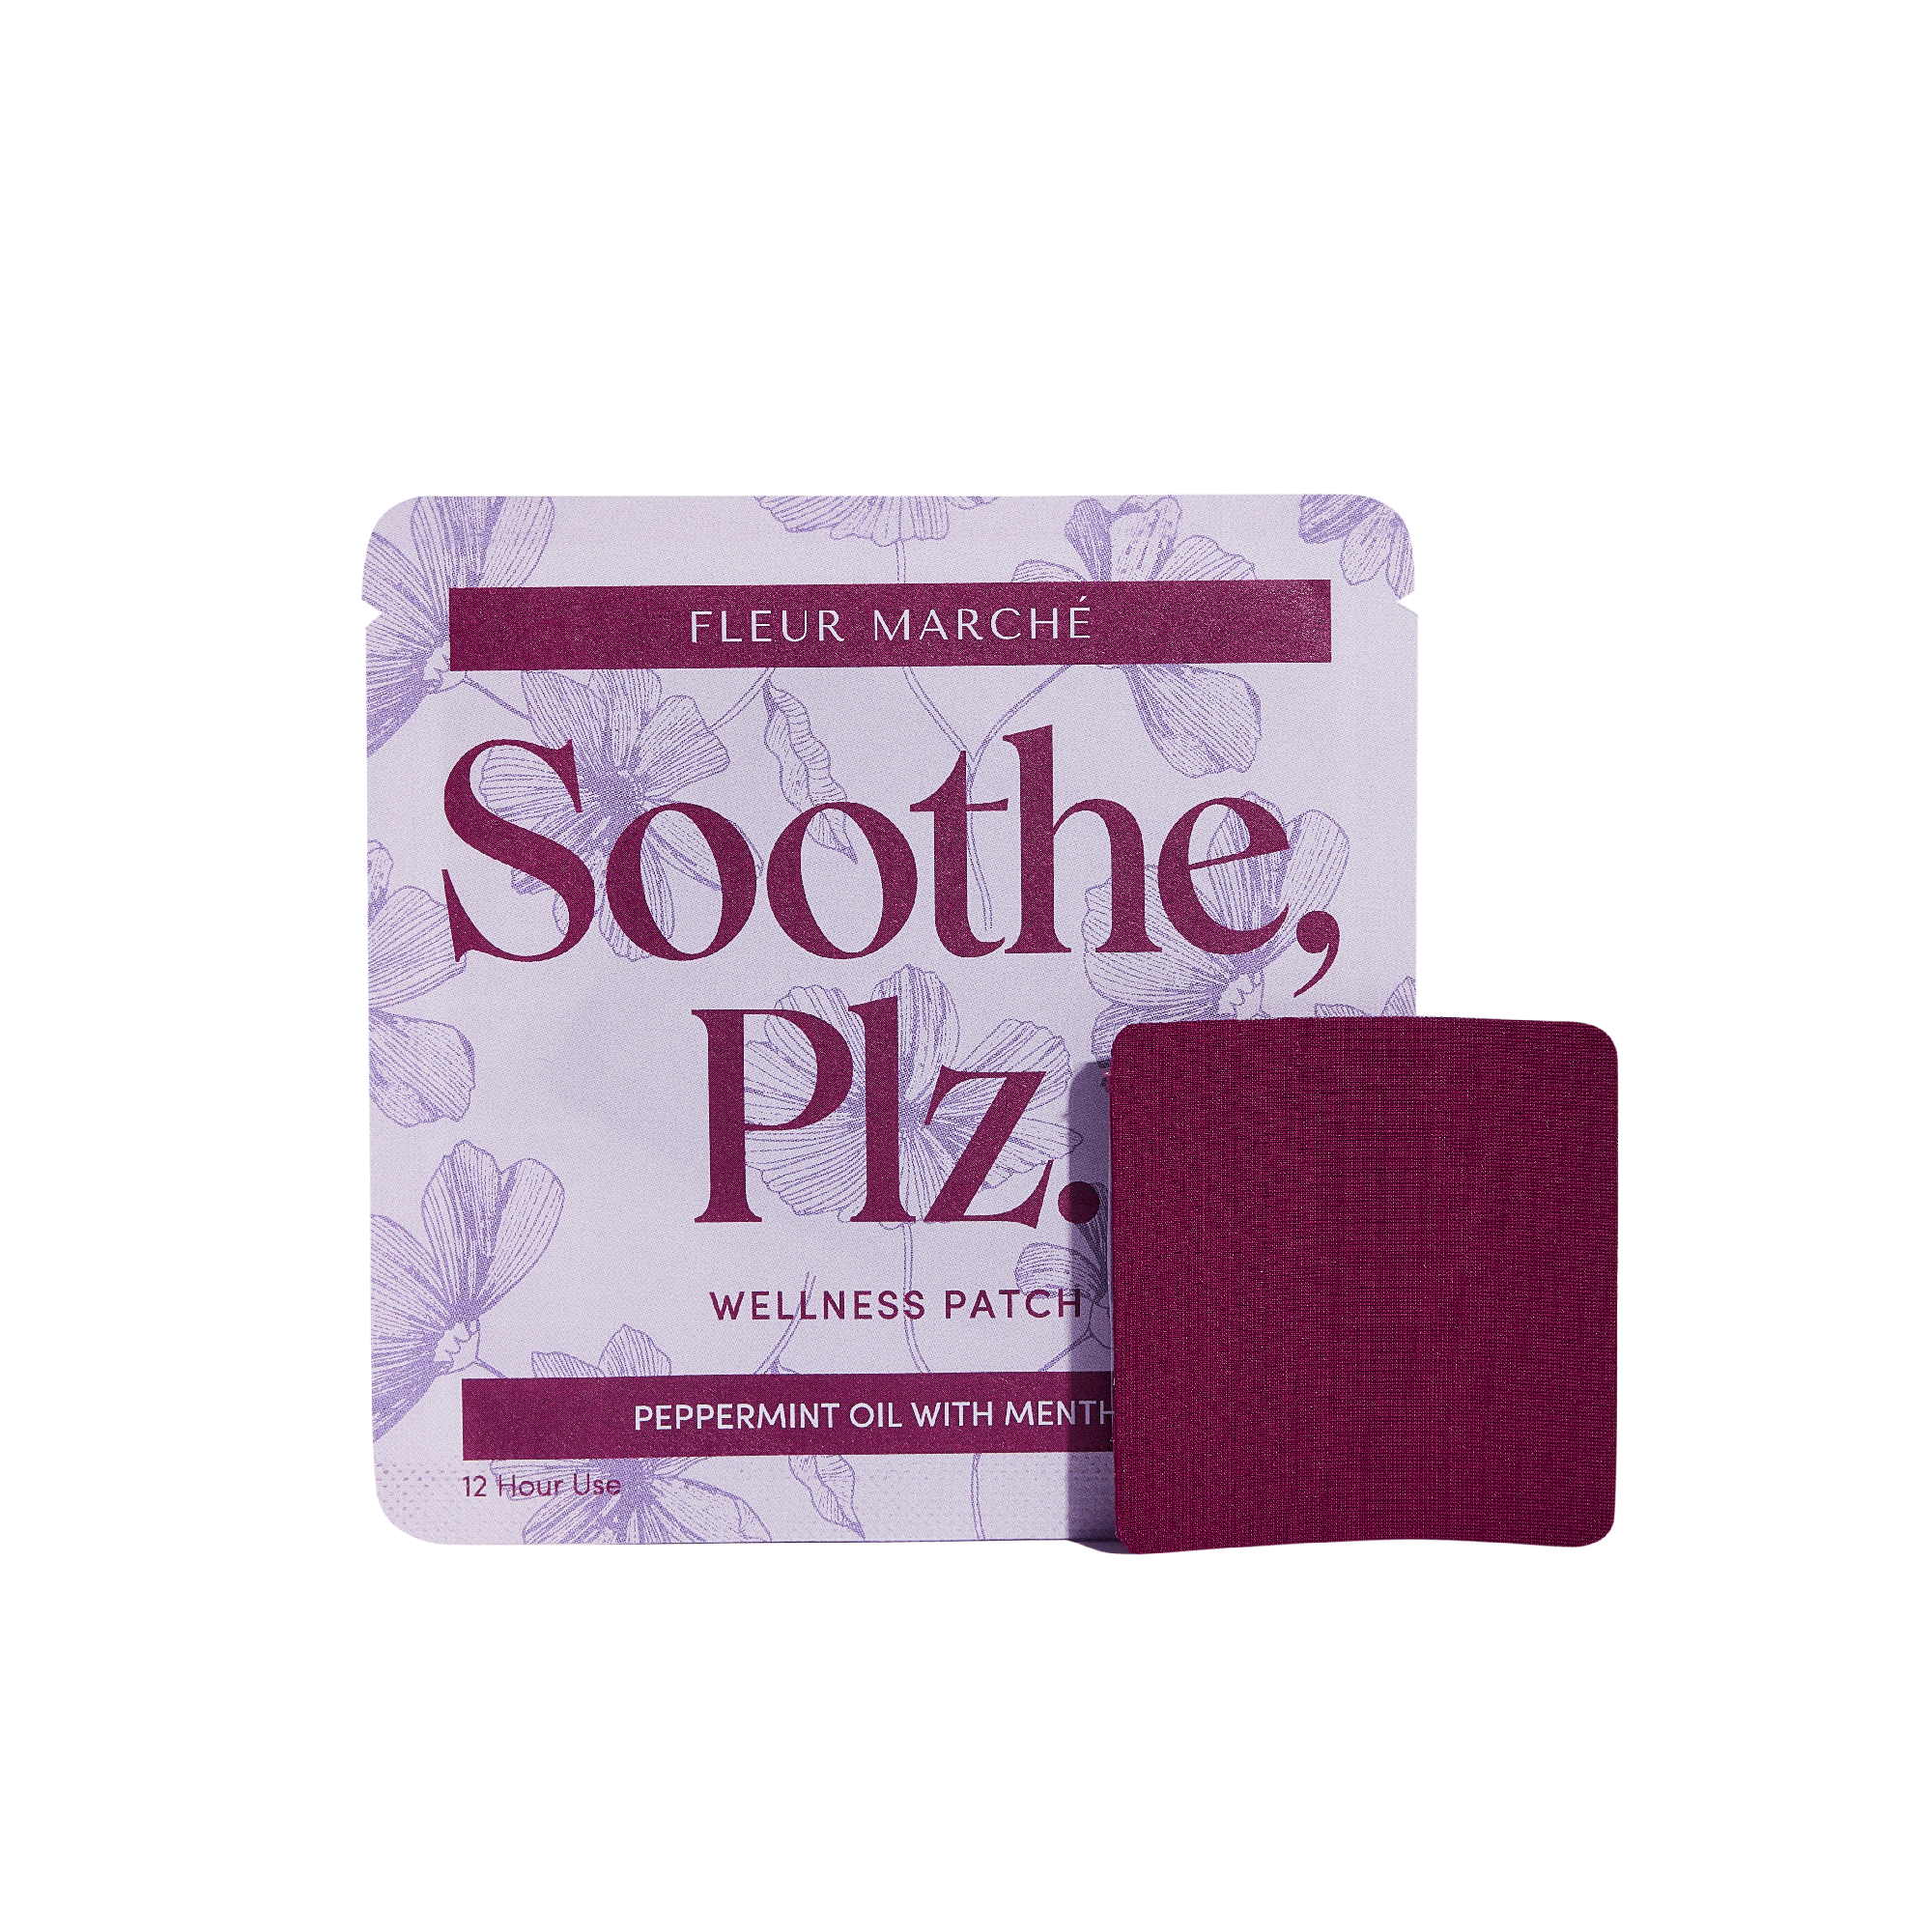 Soothe Plz. patch and sleeve